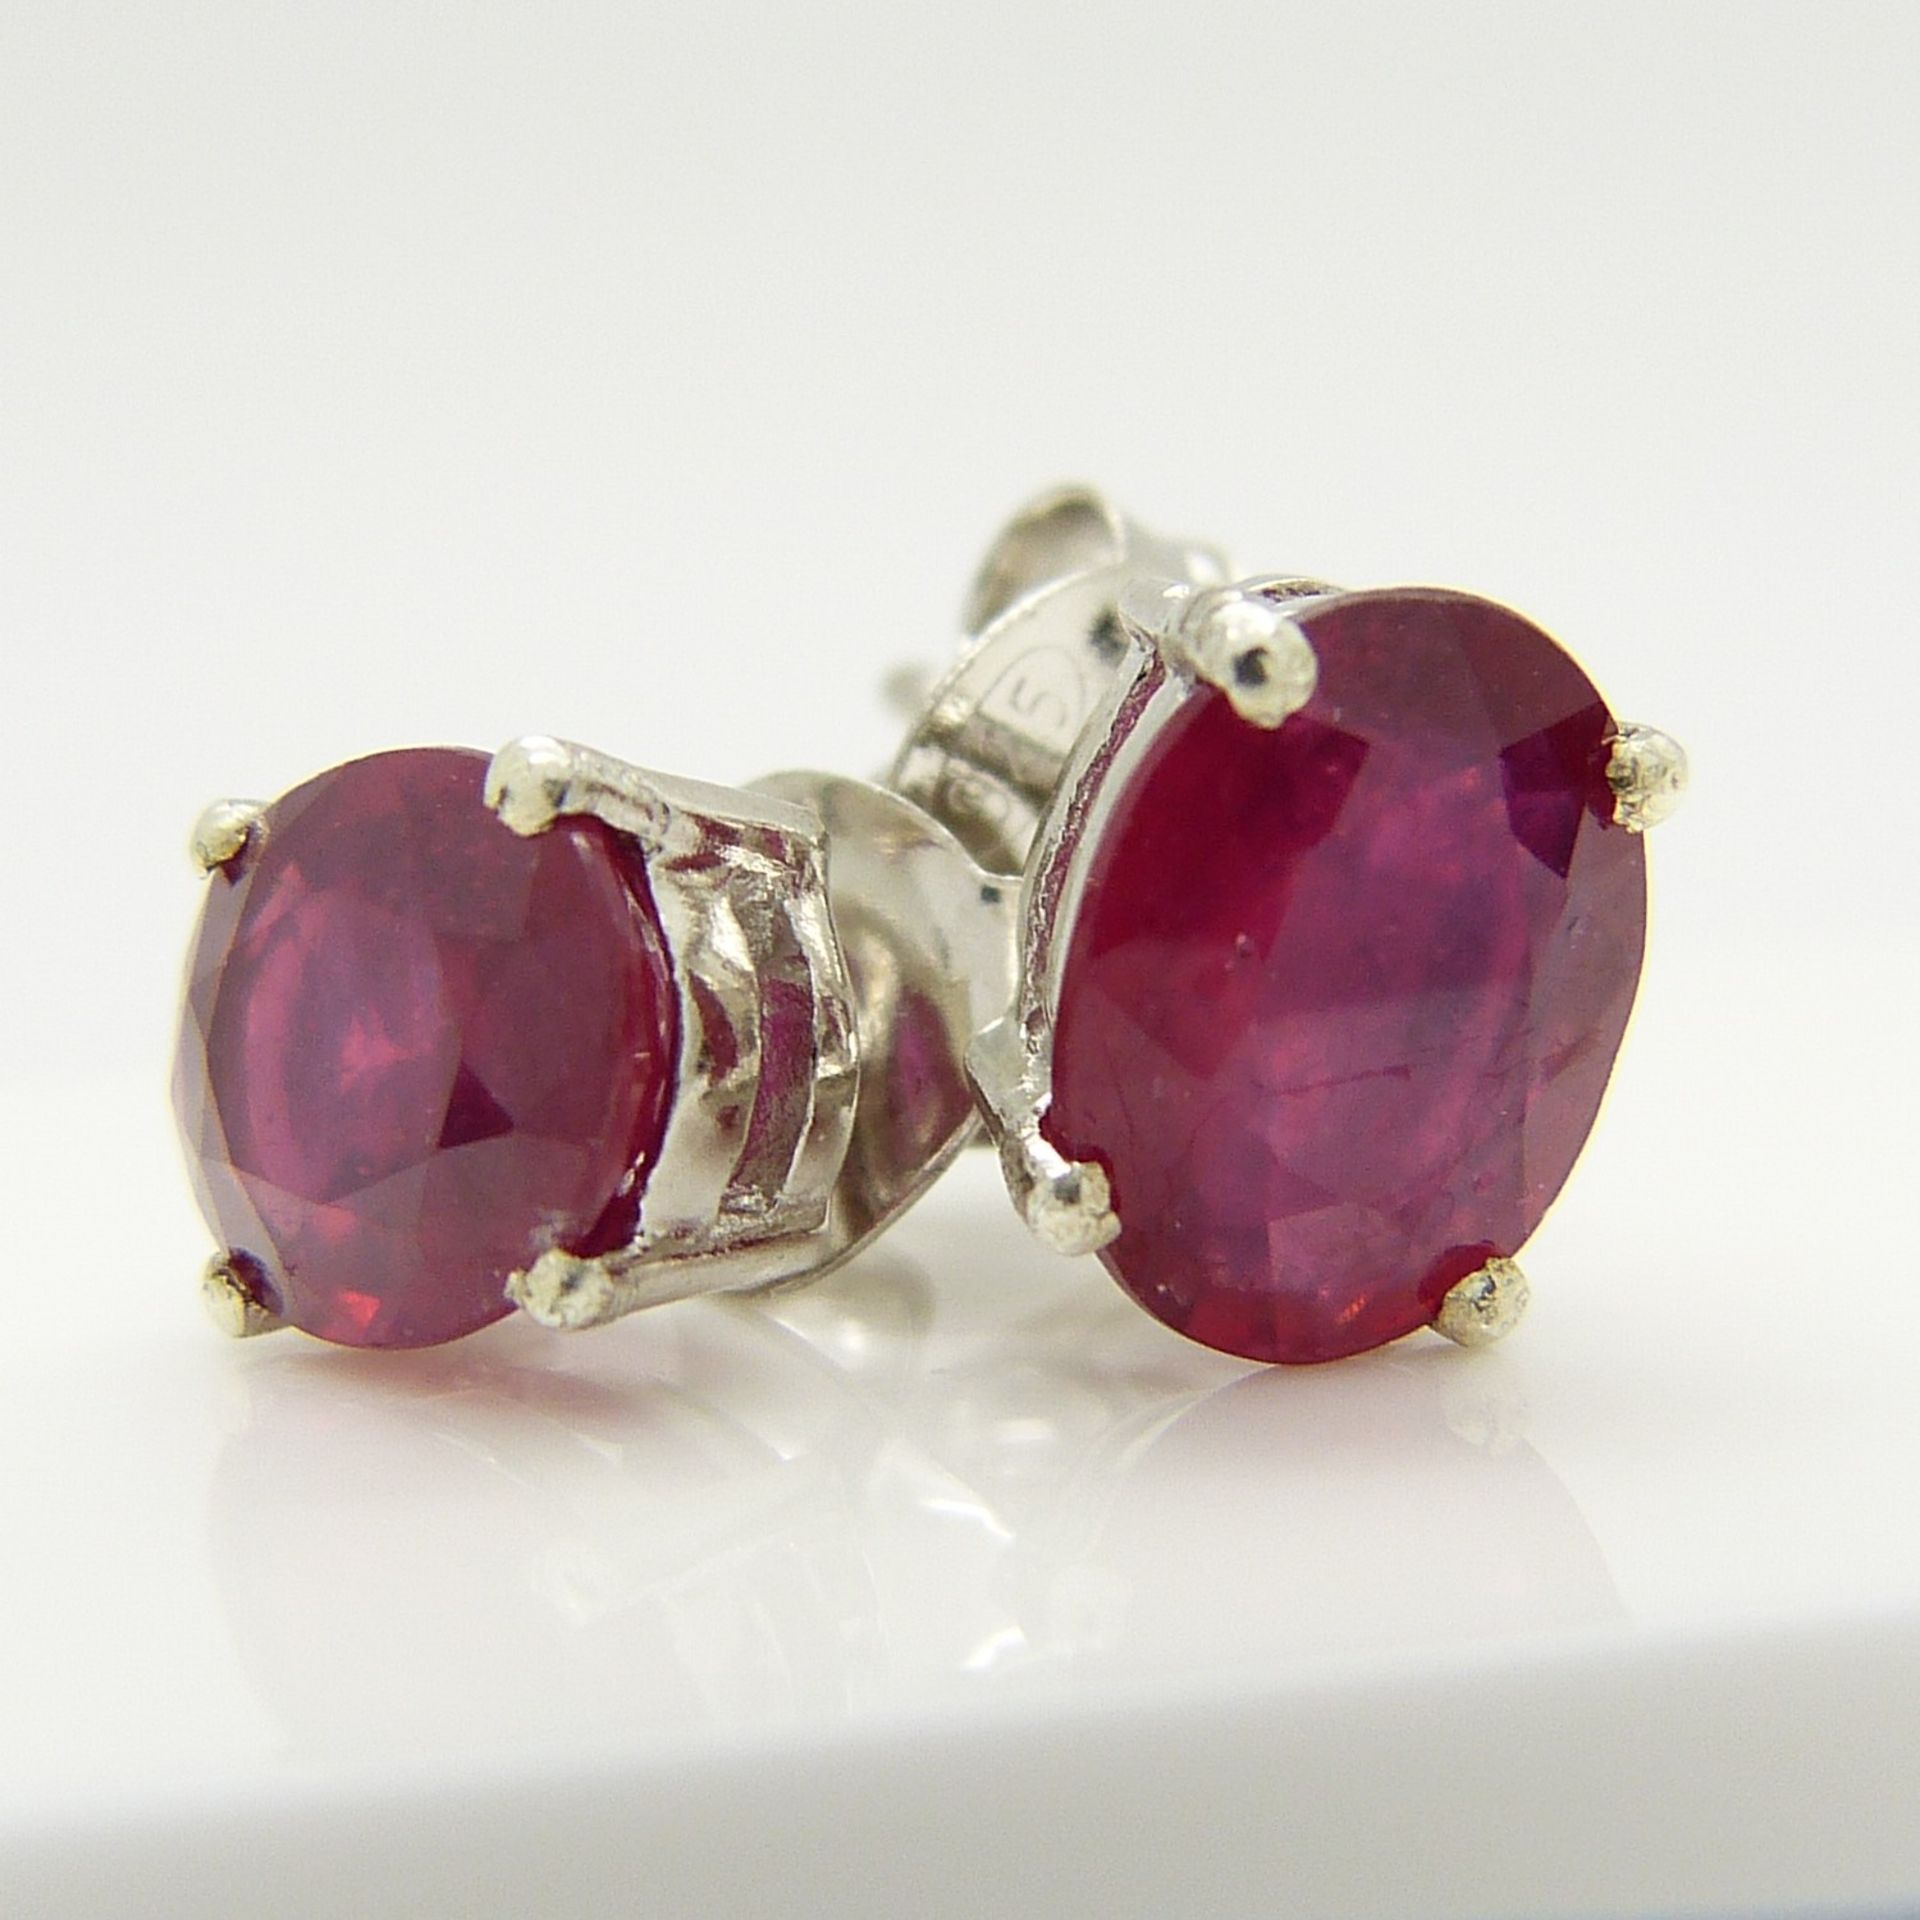 A pair of silver ear studs set with treated rubies, 1.70 carats (approx) - Image 2 of 5